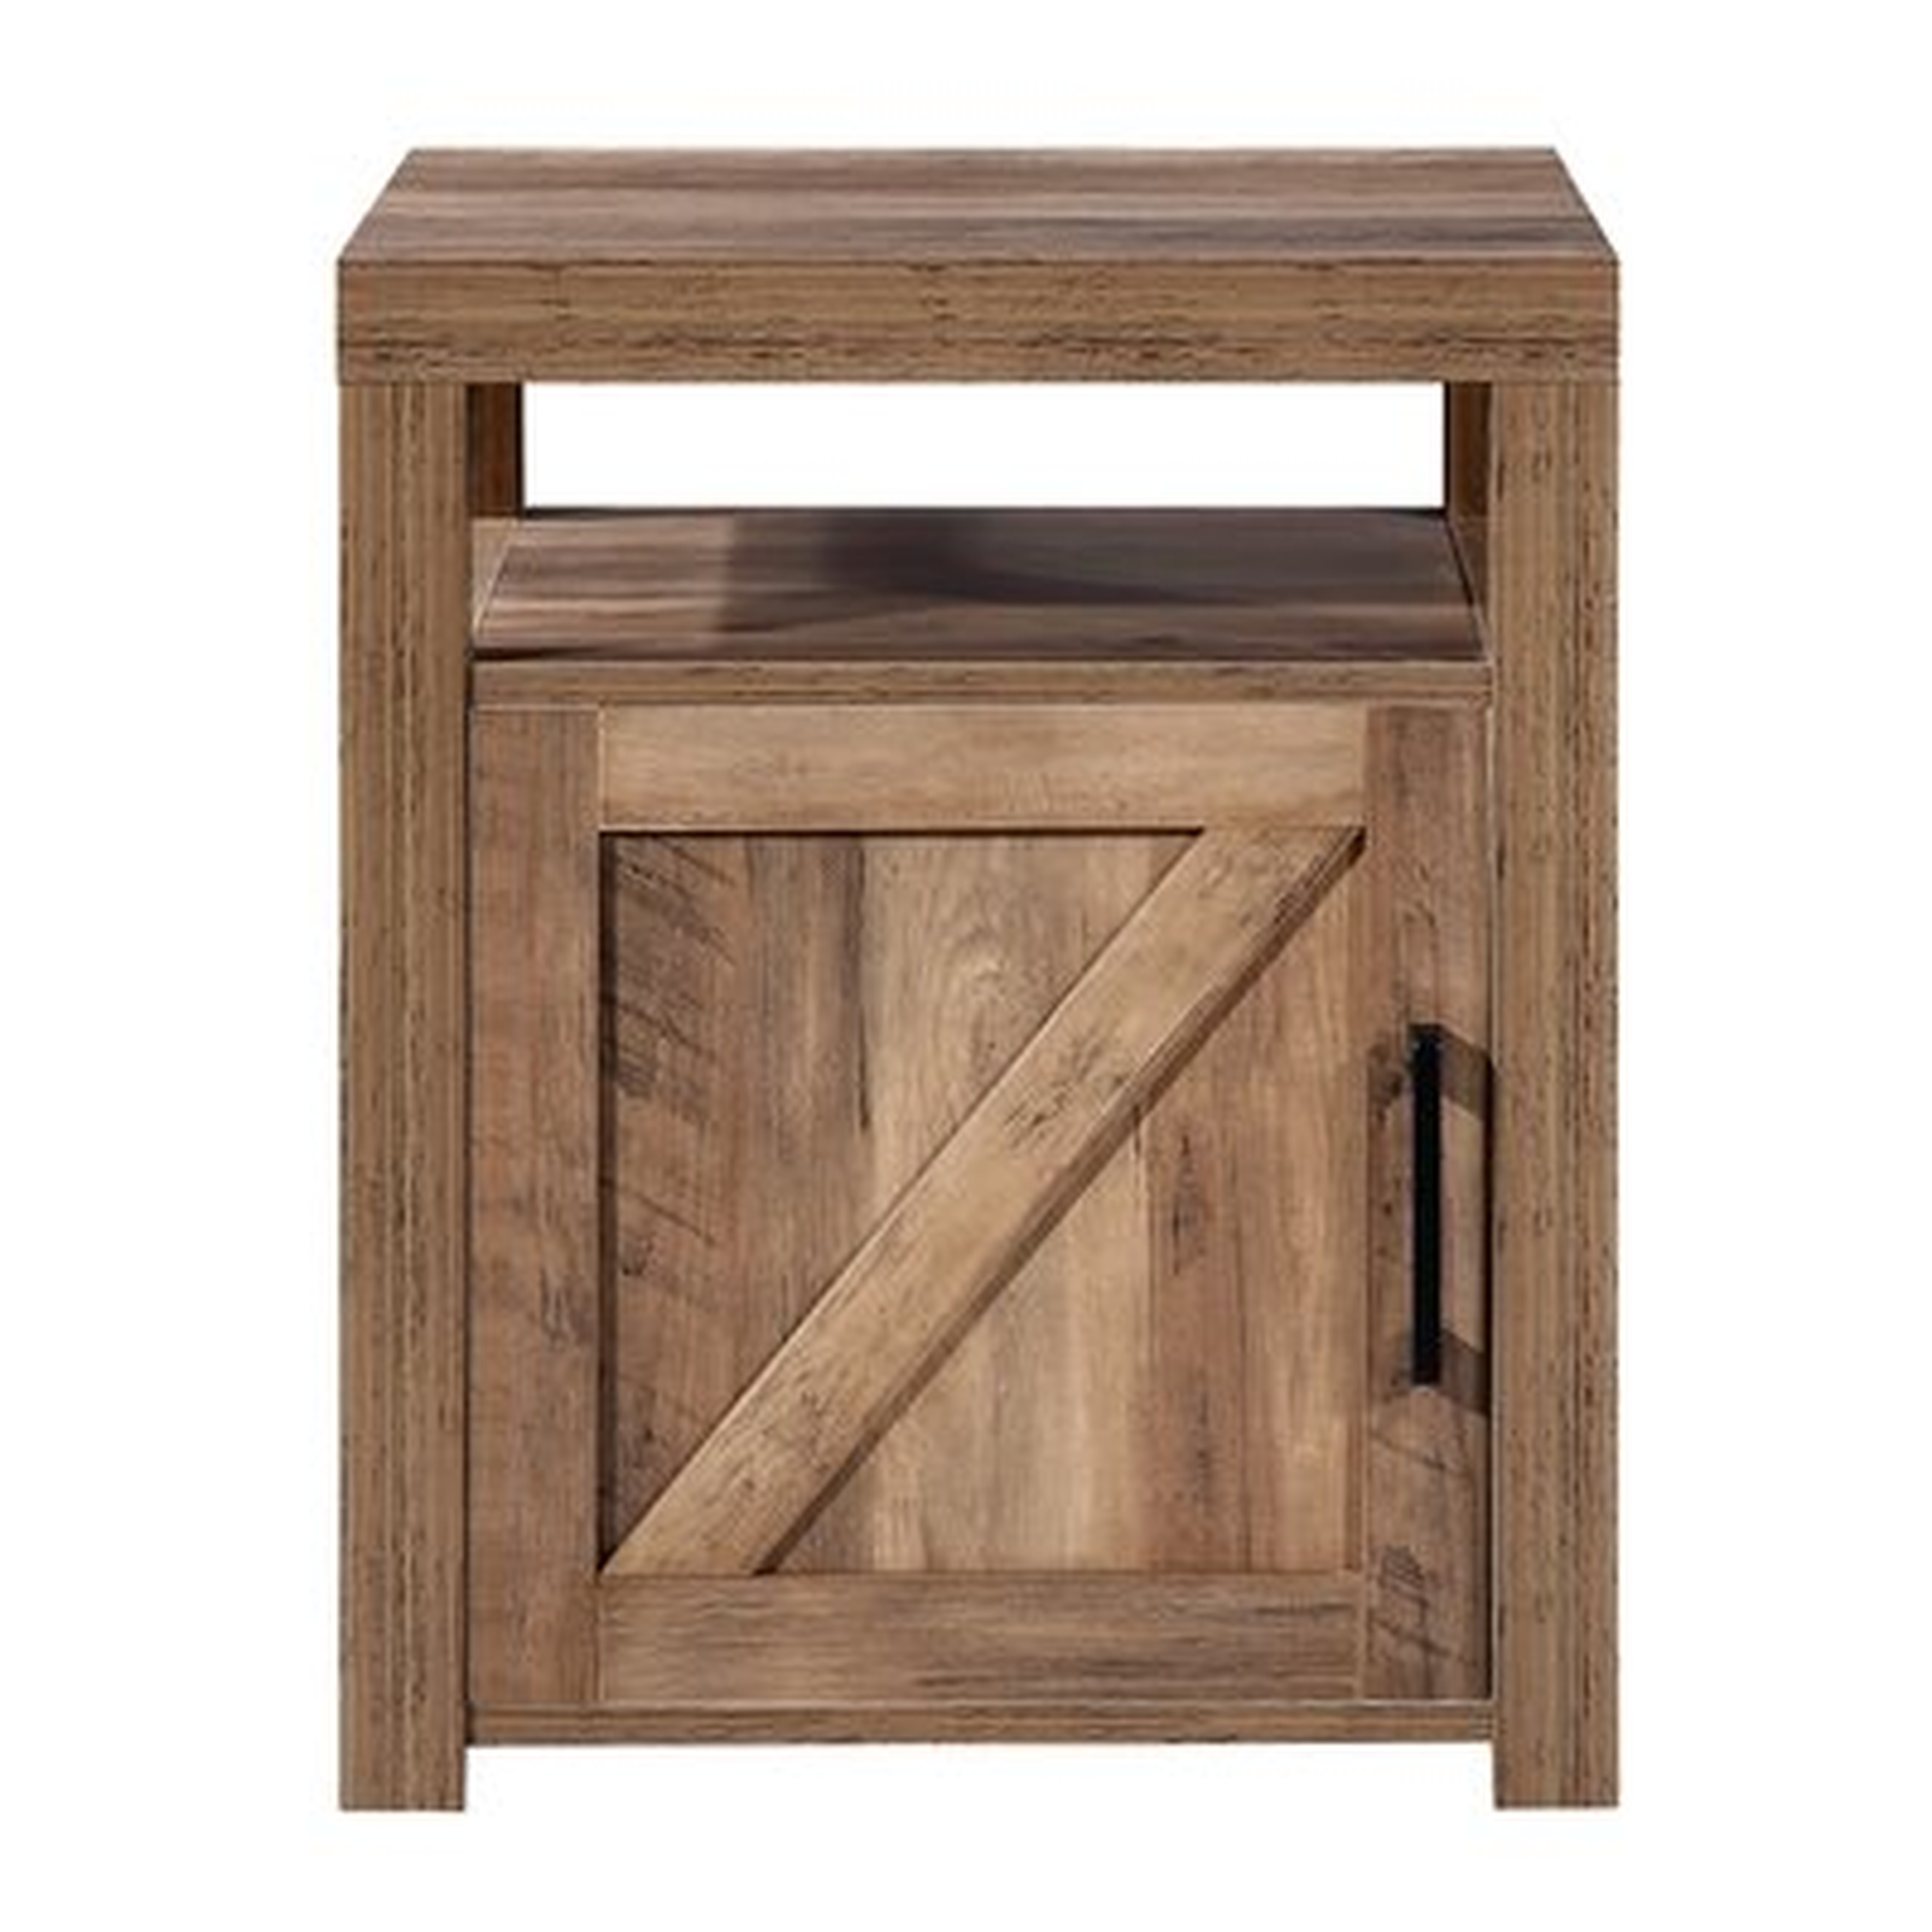 End Table With Storage - Wayfair